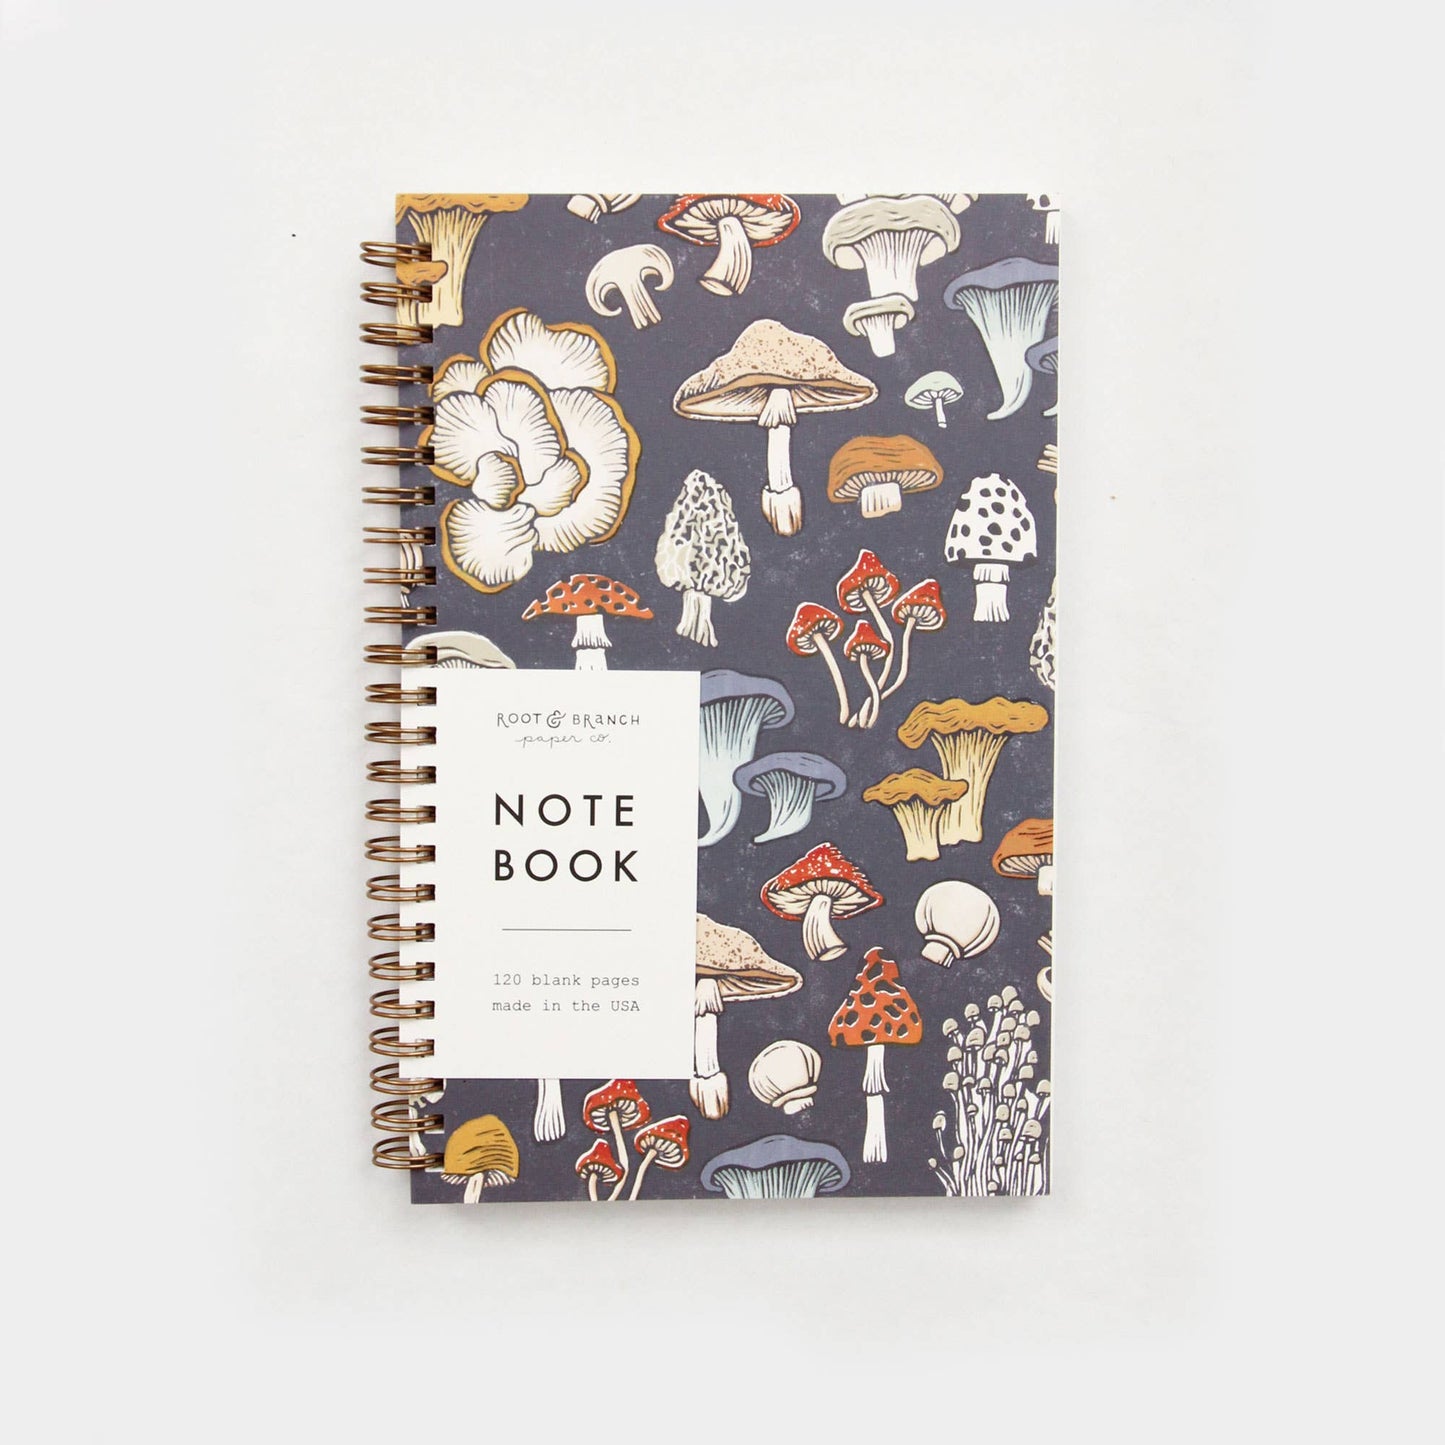 Mushroom & Fungi Spiral Bound Notebook by Root & Branch Paper Co.